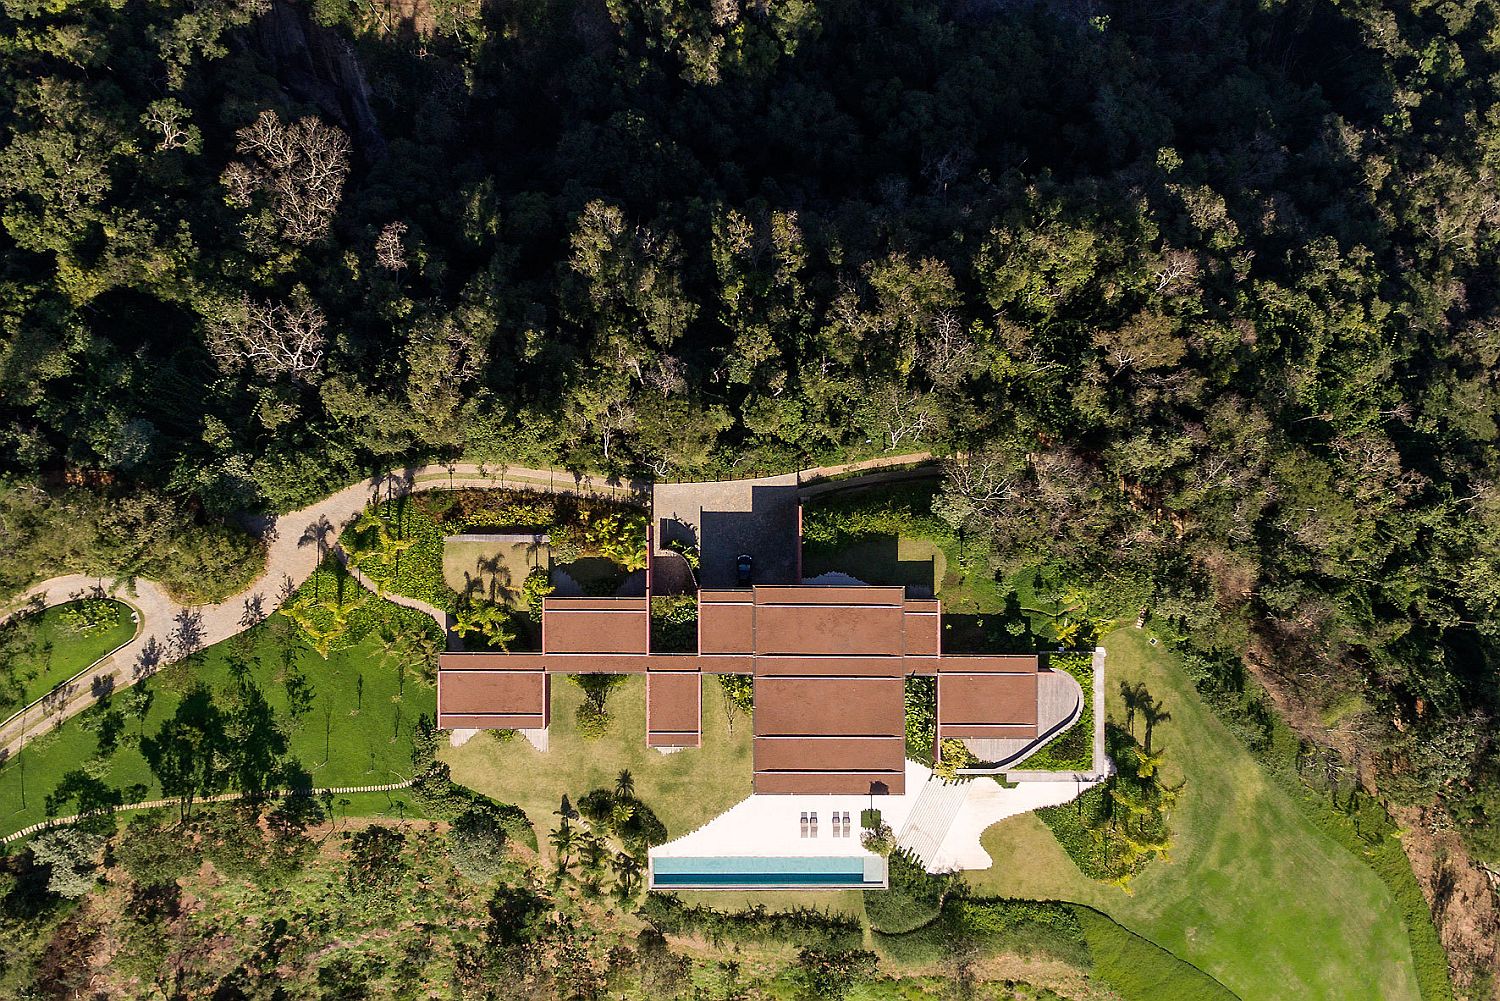 View of Casa Terra from above